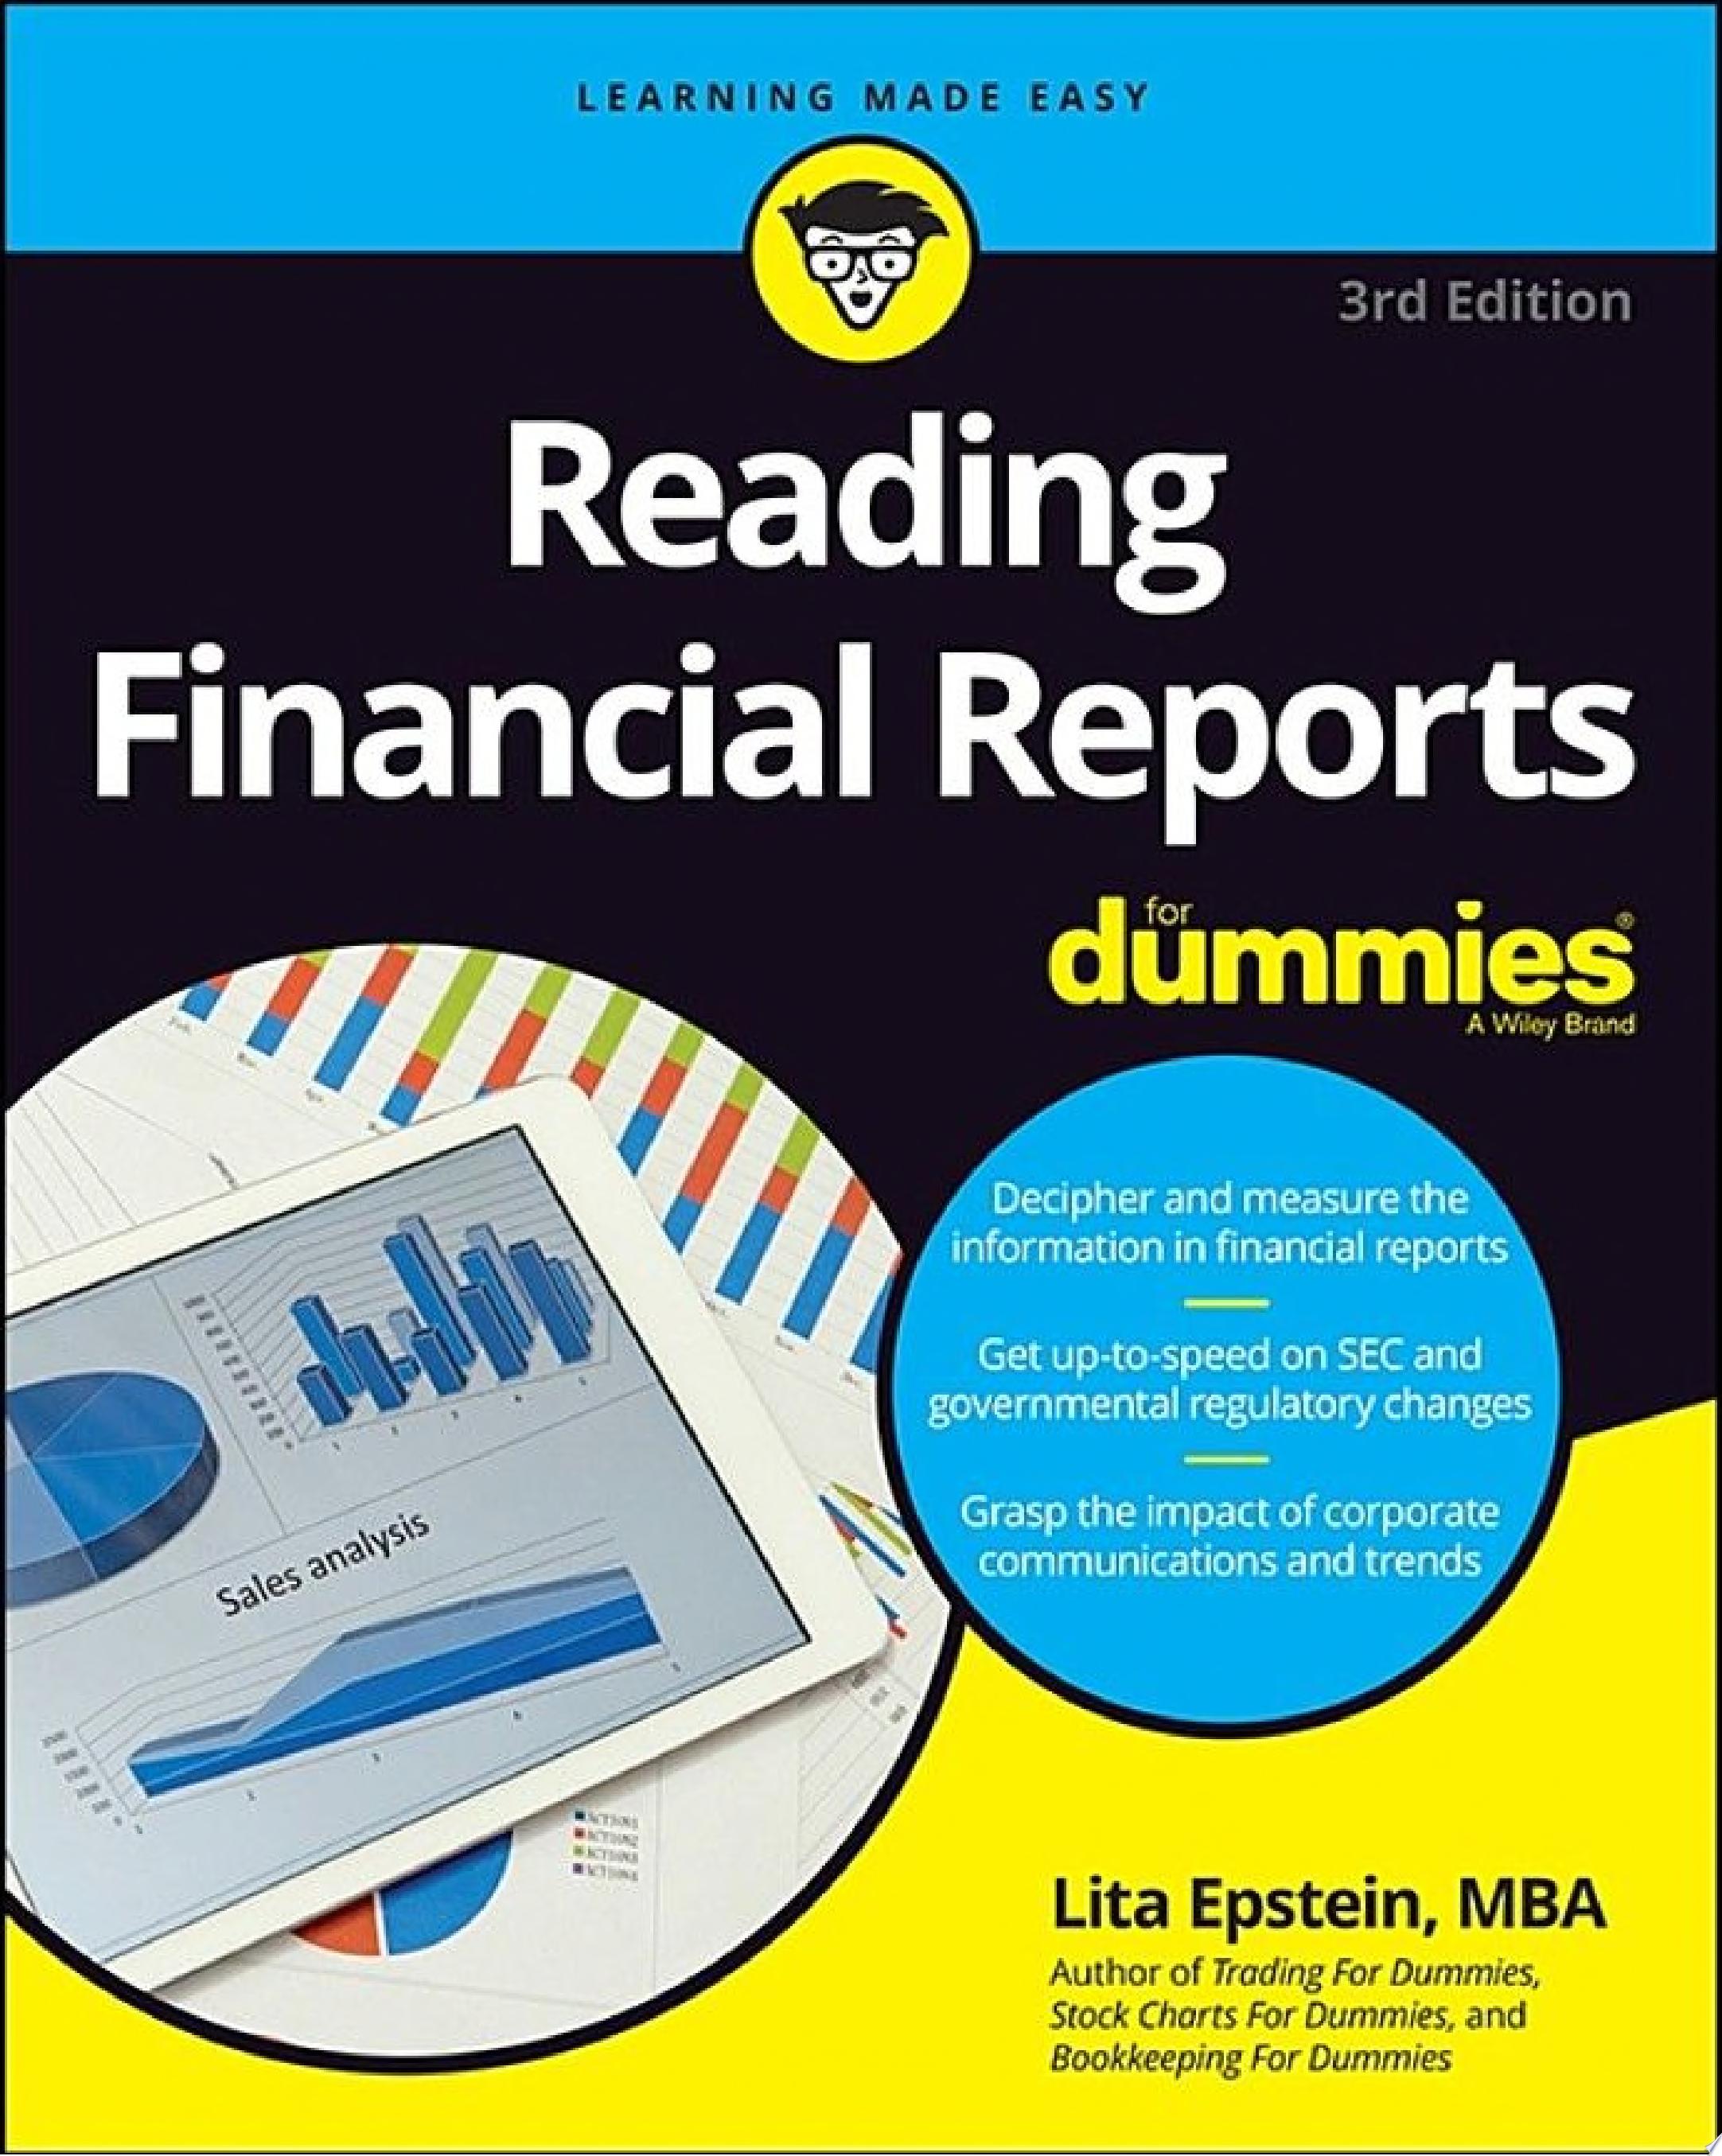 Image for "Reading Financial Reports For Dummies"